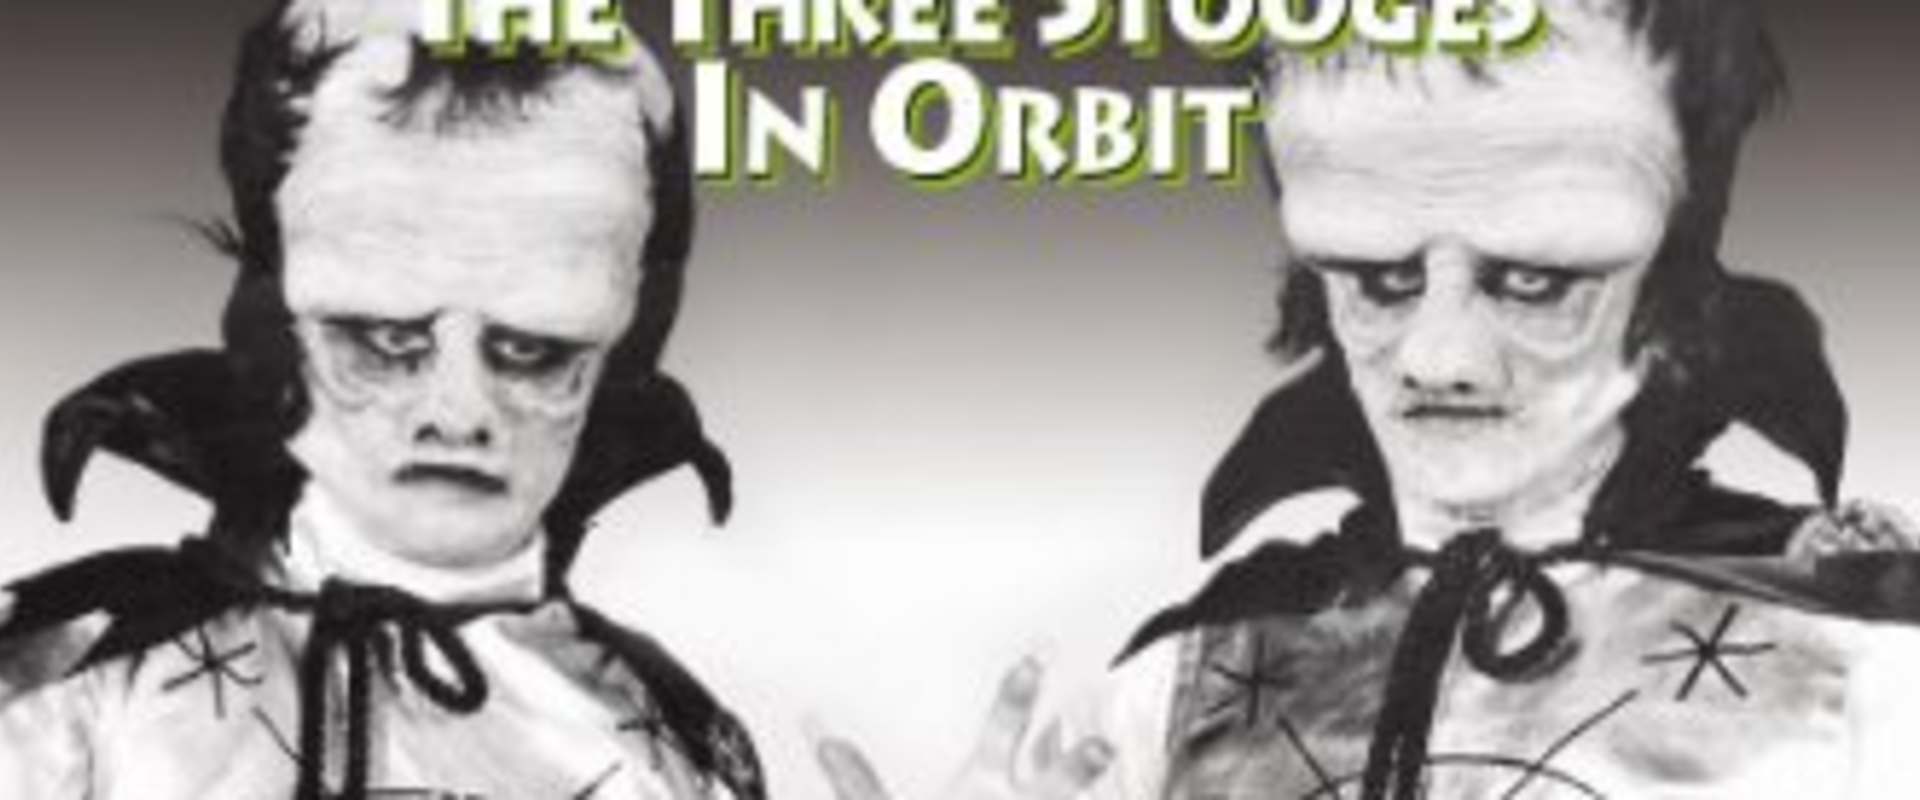 The Three Stooges in Orbit background 1